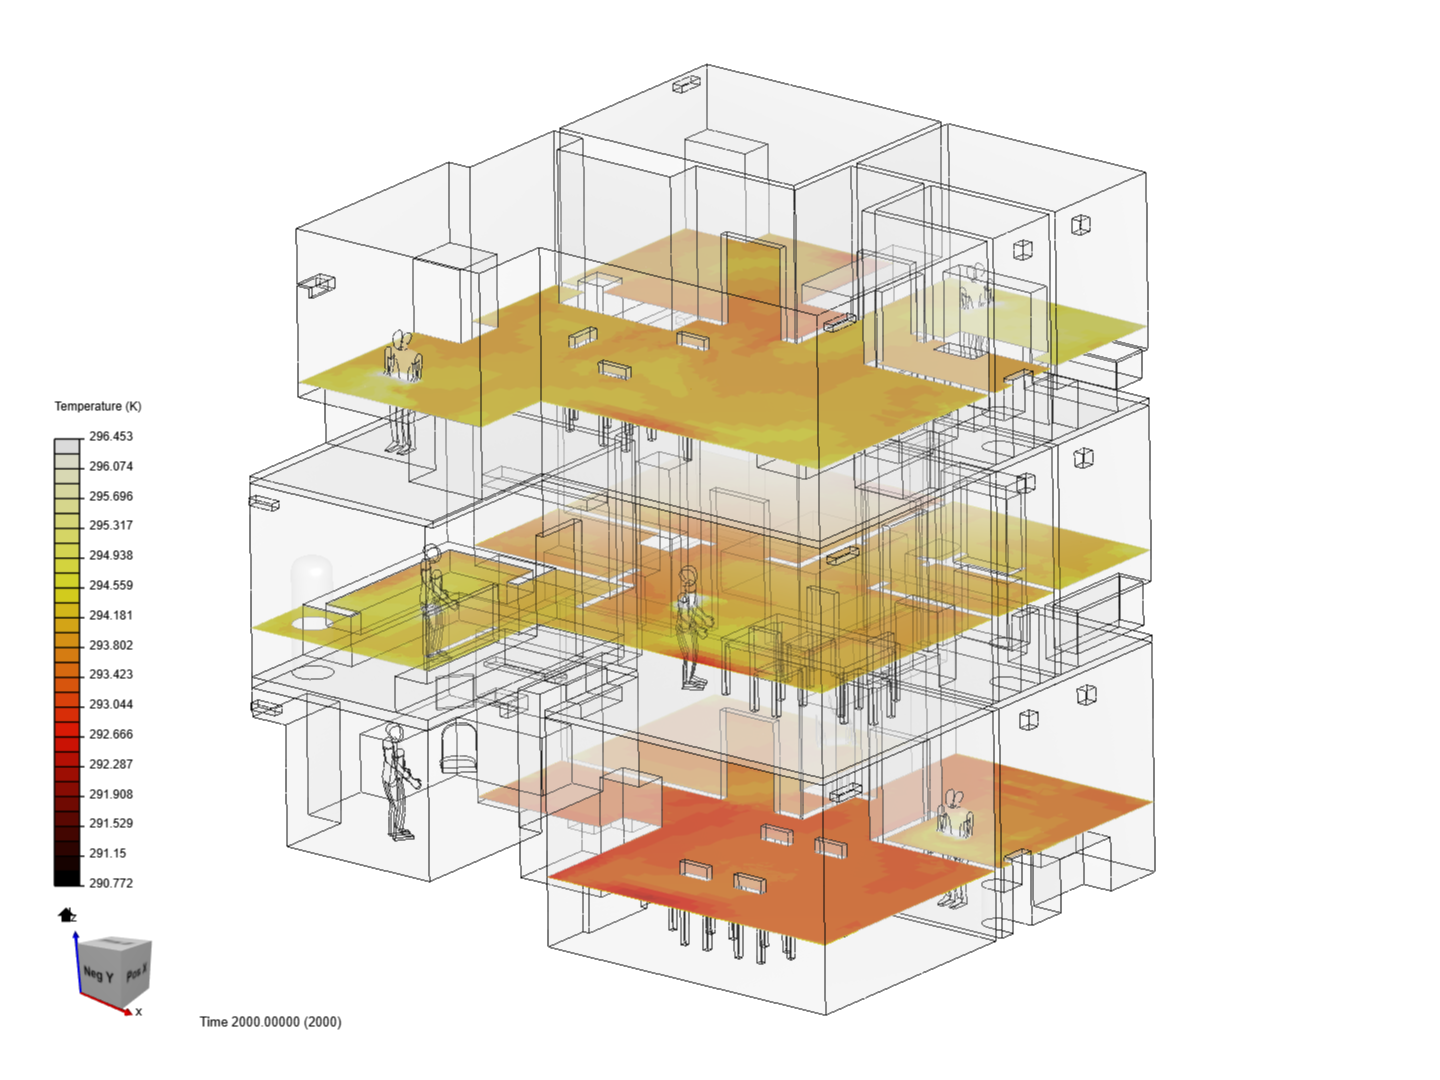 thermal_comfort_study_for_multi-story_residential_building image